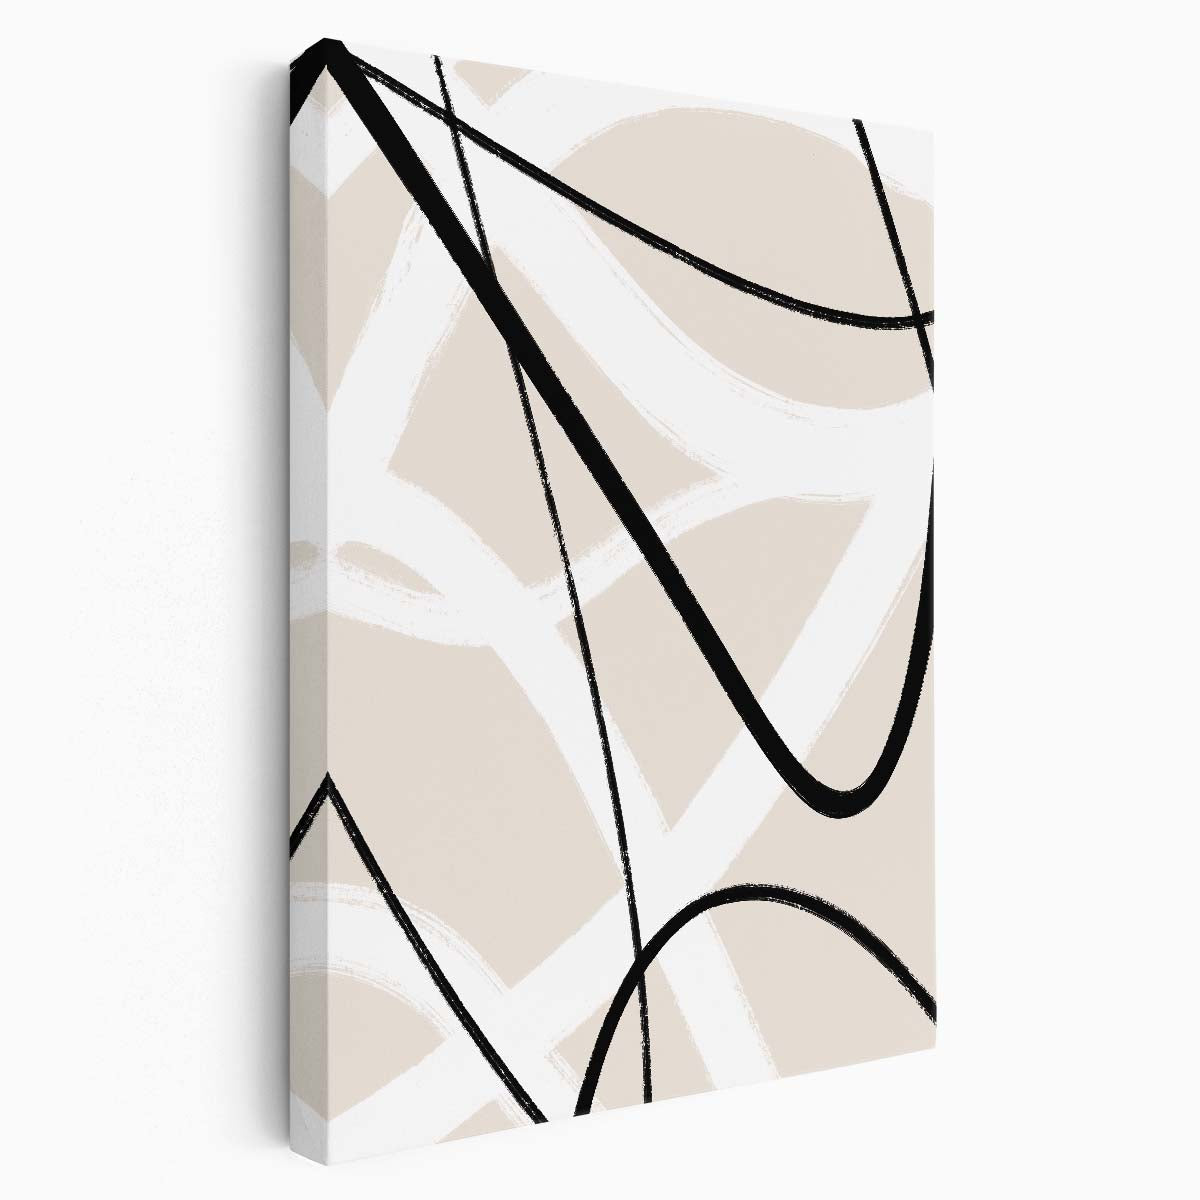 Beige Abstract Illustration Painting - Hand-drawn Graphic Art by uplusmestudio by Luxuriance Designs, made in USA